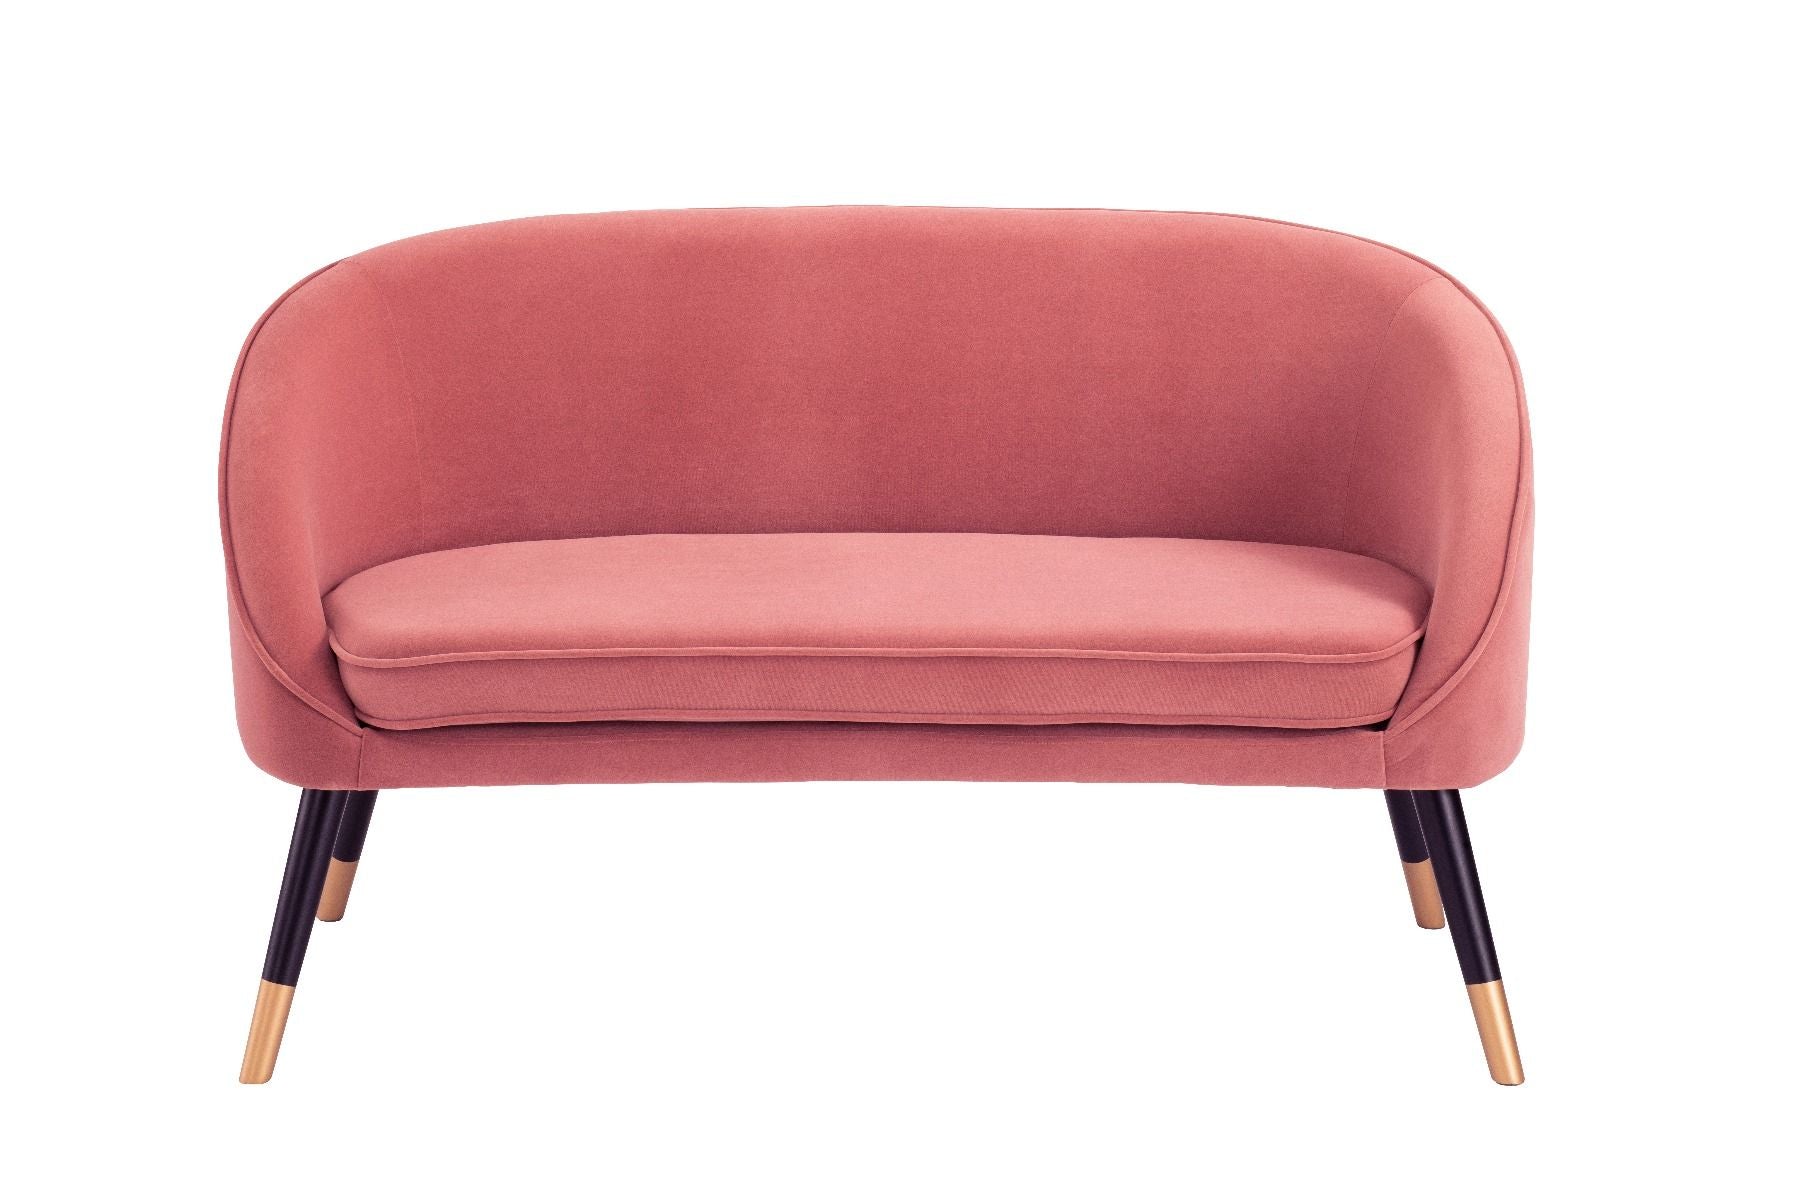 Oakley 2 Seater Sofa - Pink